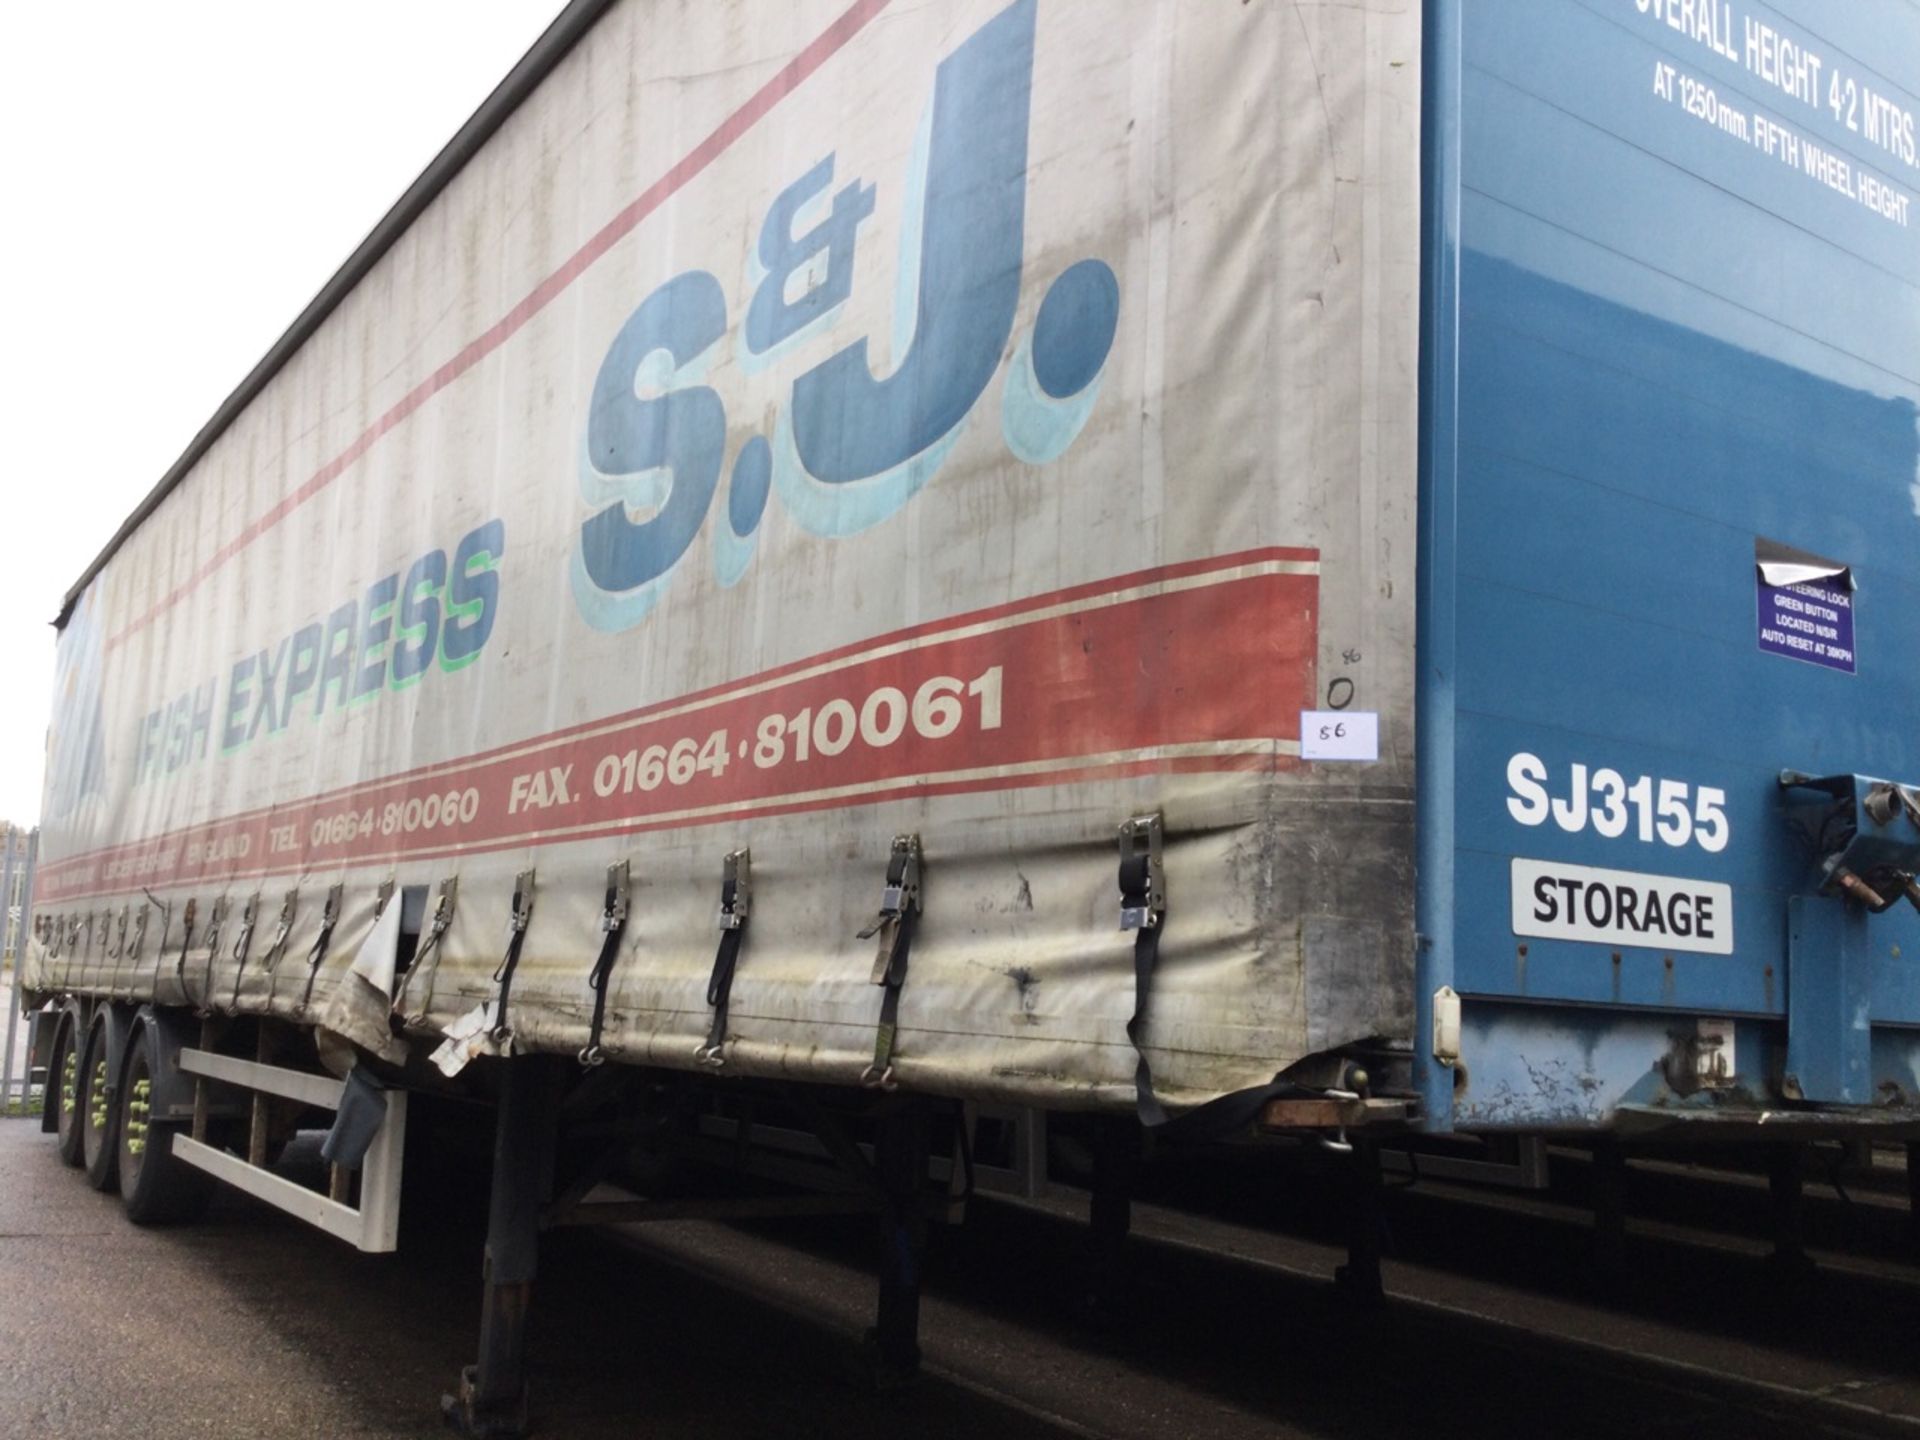 SDC Tri-Axle Curtainside Trailer Mot Expired , serial number C228103 , year 2006. Note - No BP on